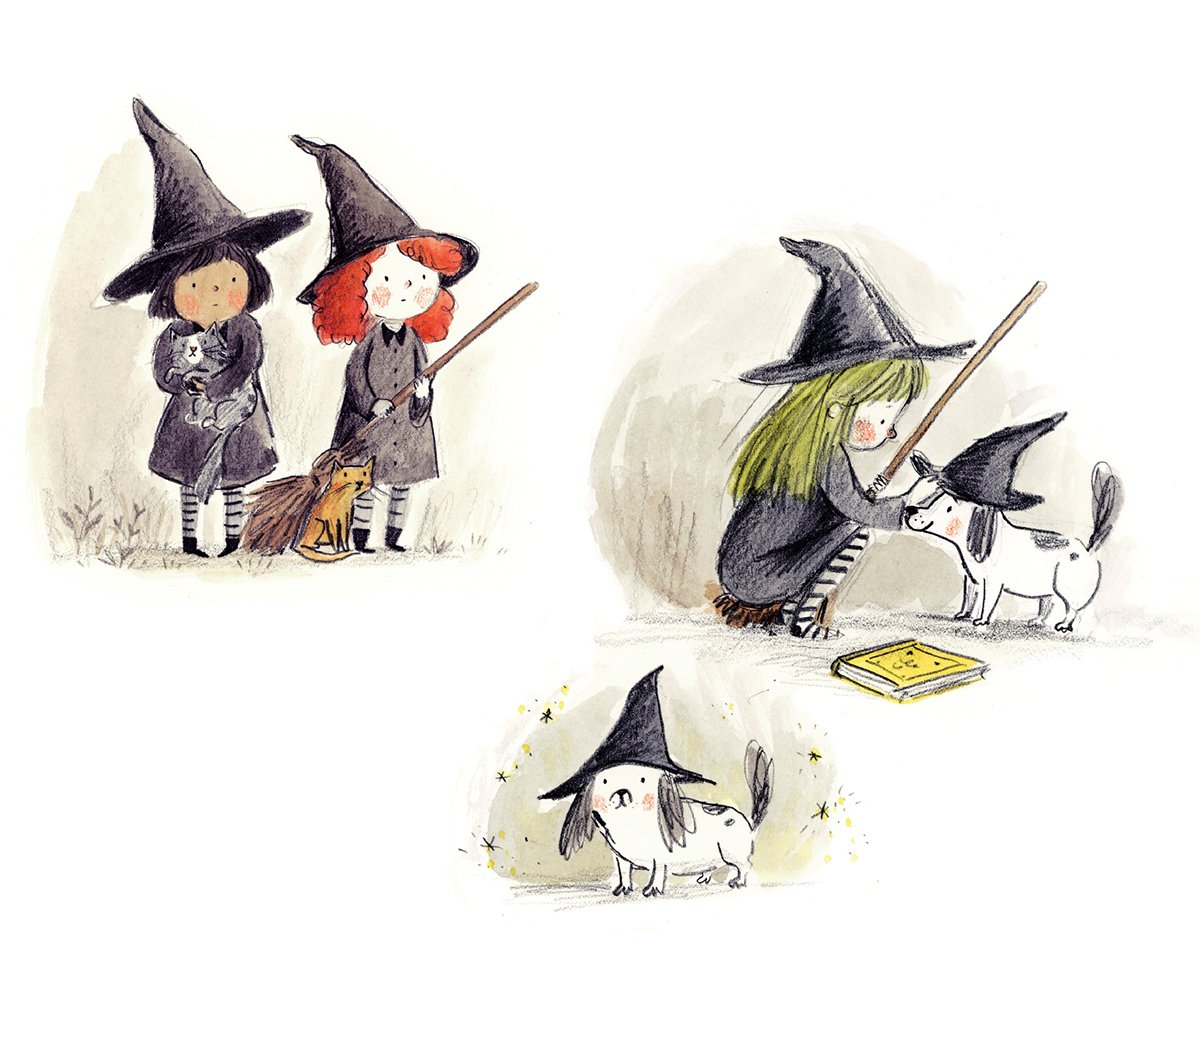 becky-cameron-dog-witches-illustration.jpg